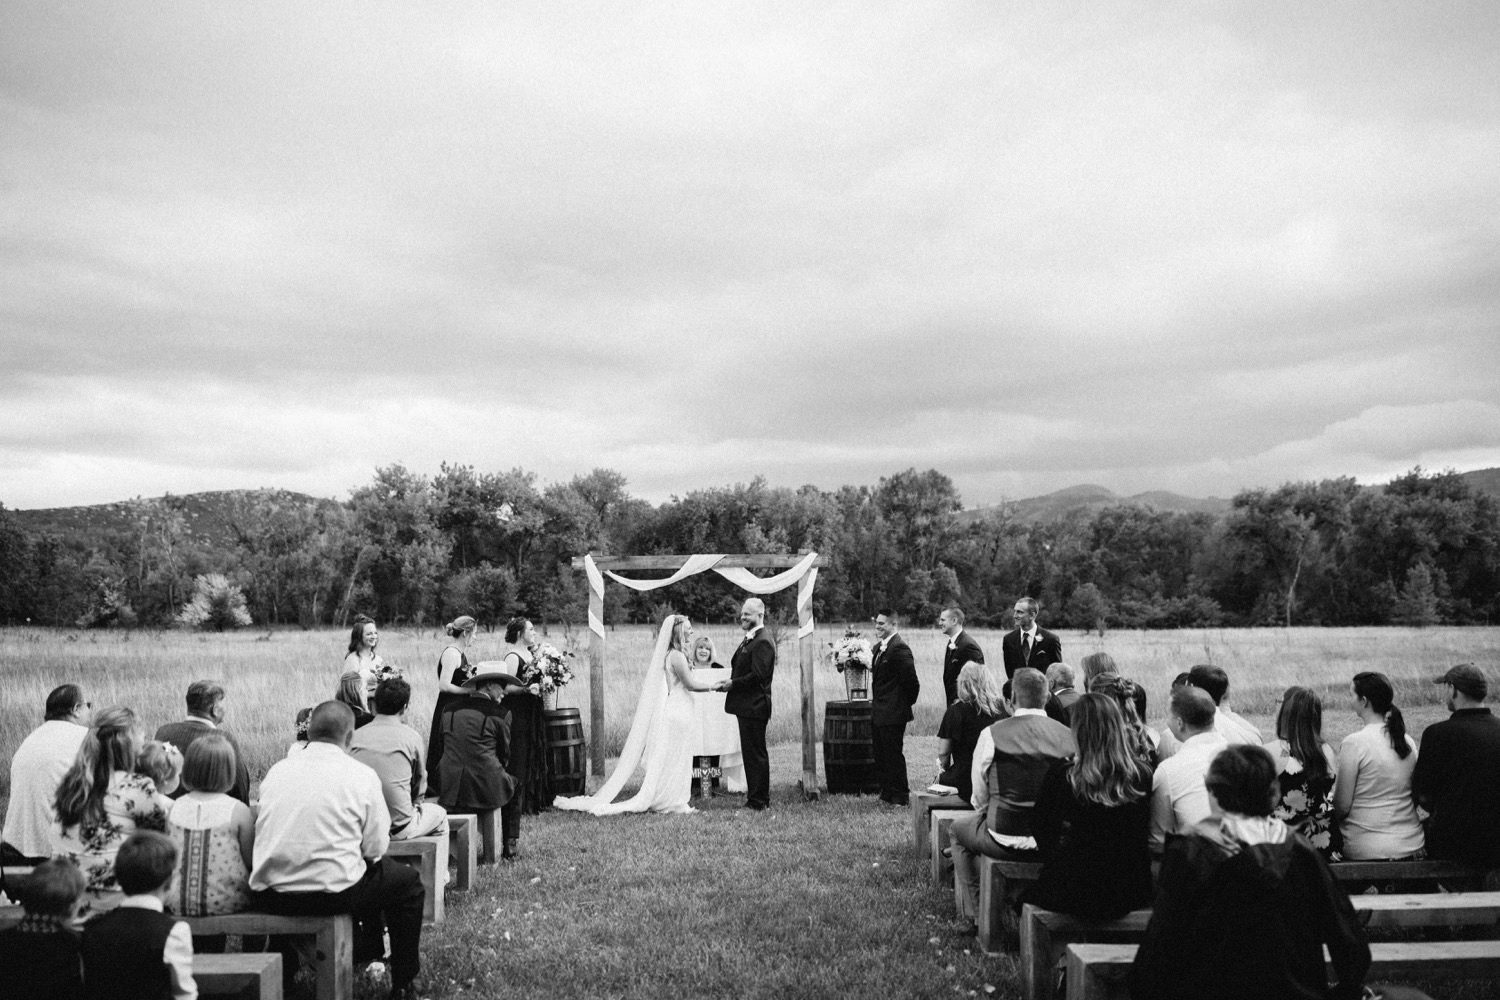 Rist Canyon Inn Wedding, Fort Collins Wedding, Colorado Wedding, Colorado Elopement, Colorado Mountain Wedding, Colorado Wedding Photographer, Colorado Elopement Photographer, Spring Wedding, Wedding Photography, Documentary Wedding Photography, Photojournalistic Wedding Photography, Wedding Inspiration, Wedding Ideas, Wedding Photos, Anna Be Wedding Dress, Compass Rose Floral, Cathedral Veil, Bride and Groom, Wedding Ceremony, Outdoor Wedding Ceremony, Wooden Altar, Wedding Arch with Tulle